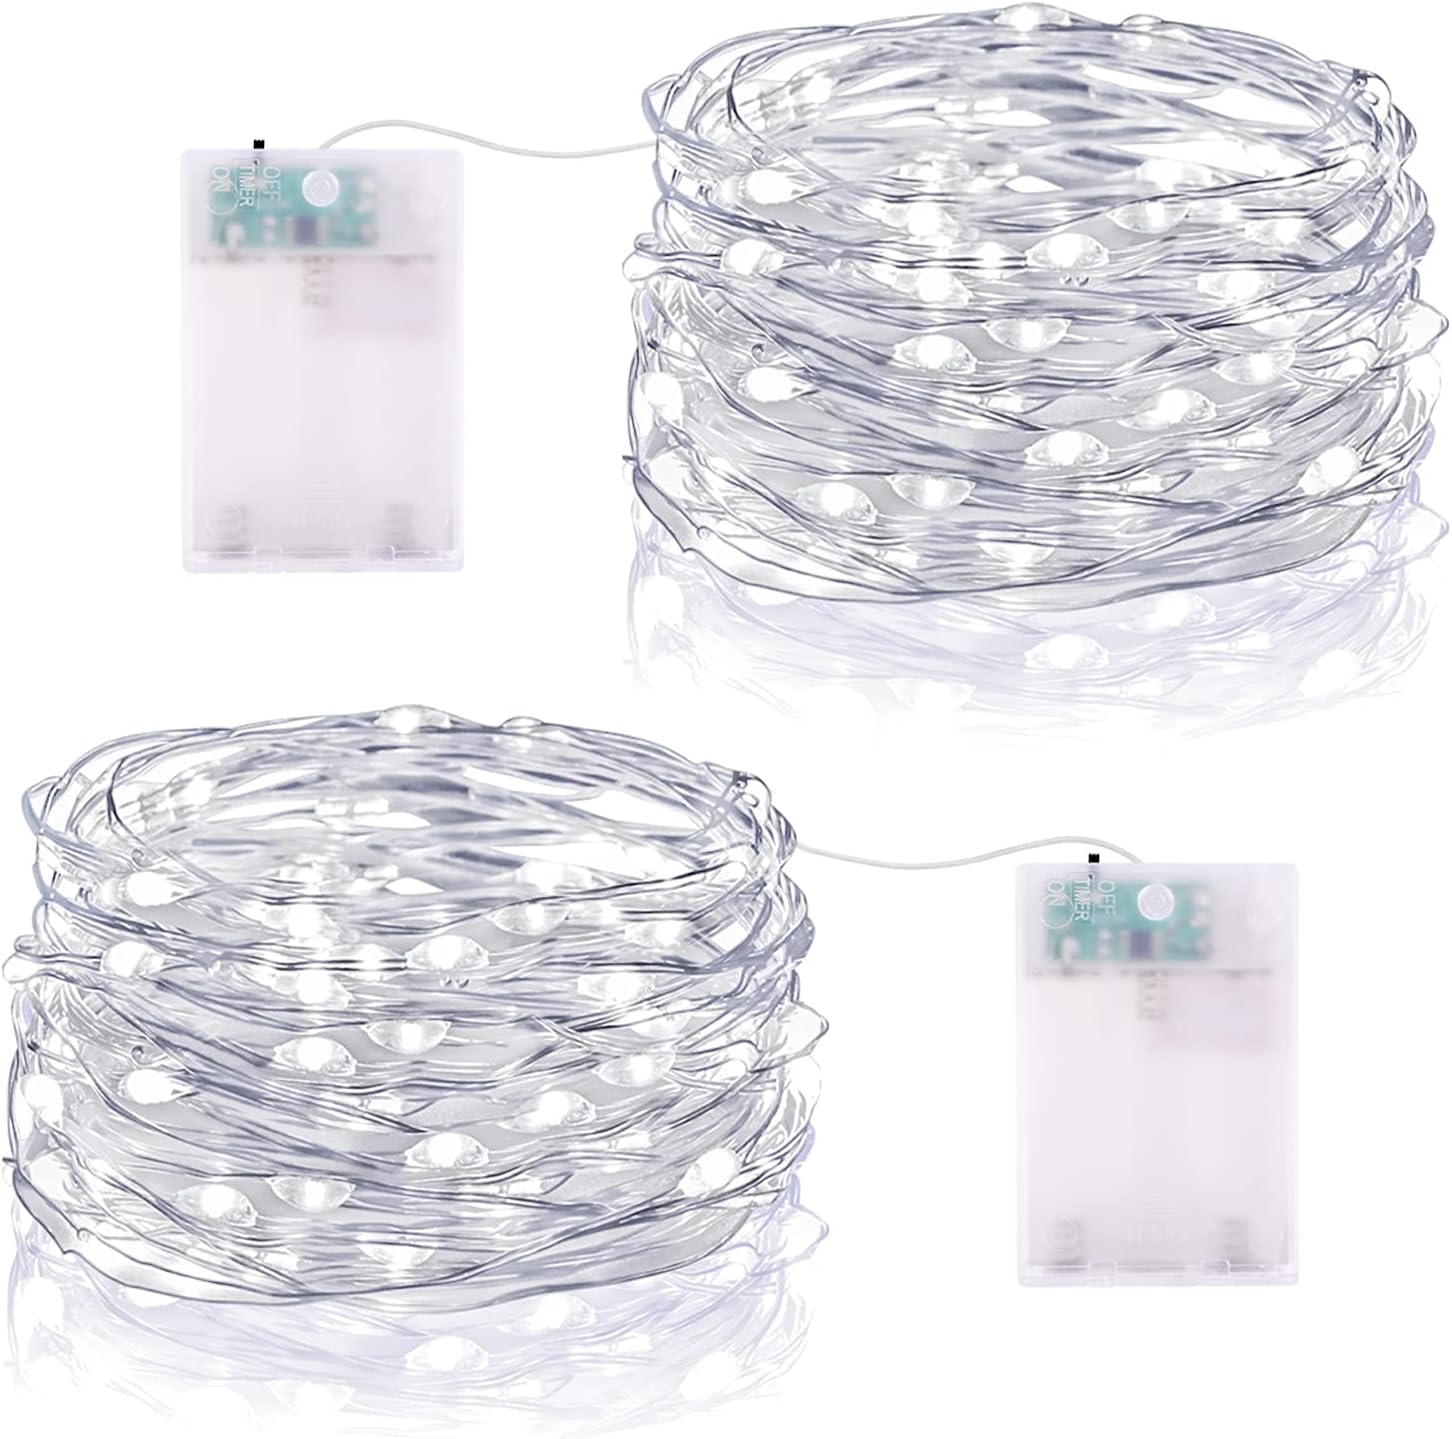 Fairy Lights Battery Operated with Timer 2 Pack Fairy Lights 16FT/5M Battery Operated String Lights 50 LED Twinkle Lights Battery Operated for Bedroom Christmas Party Wedding Decoration(Cool White)